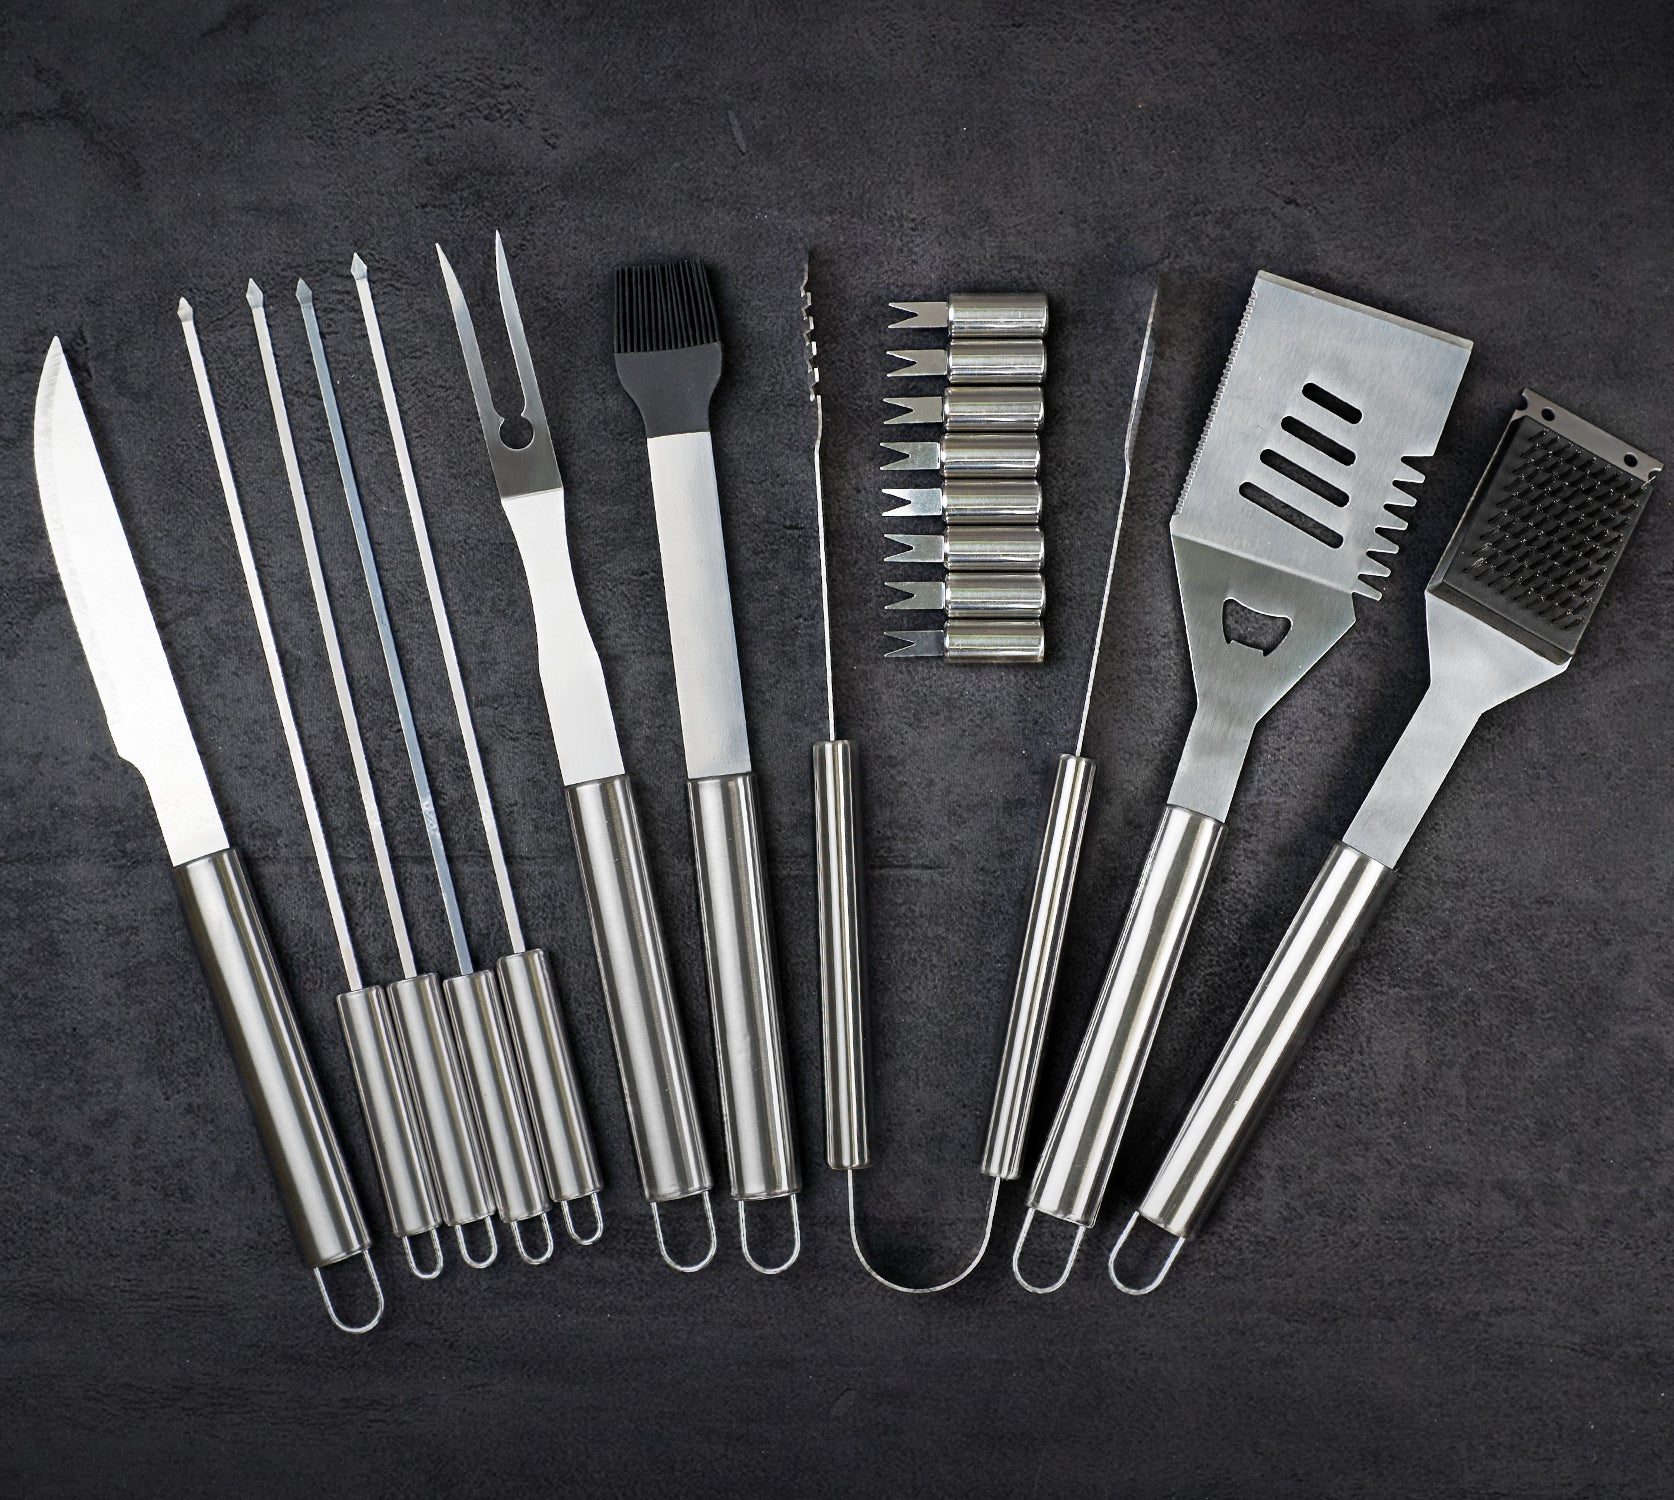 Grill Accessories for Outdoor Grilling - Outdoor Grill Accessories "Texas" for Barbeque - Premium Grill Tool Sets Grilling Utensils Set - Griddle Accessories Kit - BBQ Gear